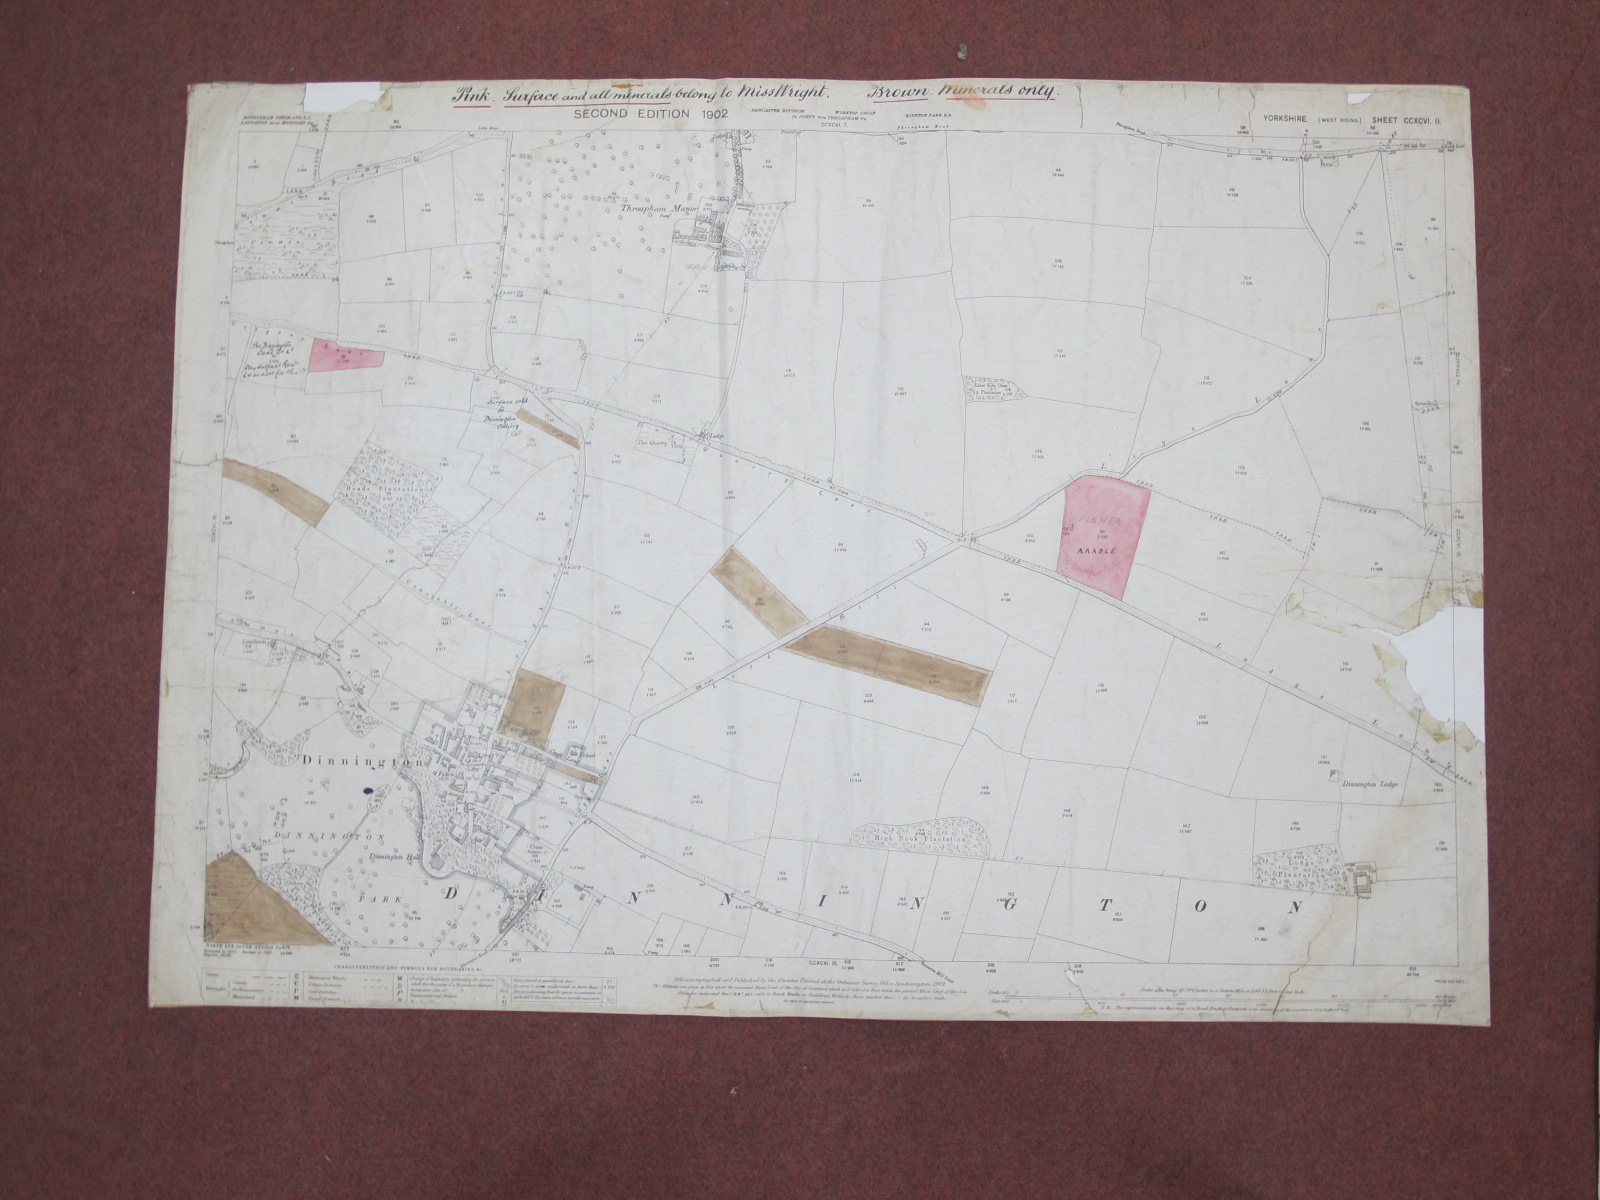 West Riding Yorkshire Maps, Rotherham, North Anston, Todwick and area - some dates noted, 1892, - Image 7 of 9